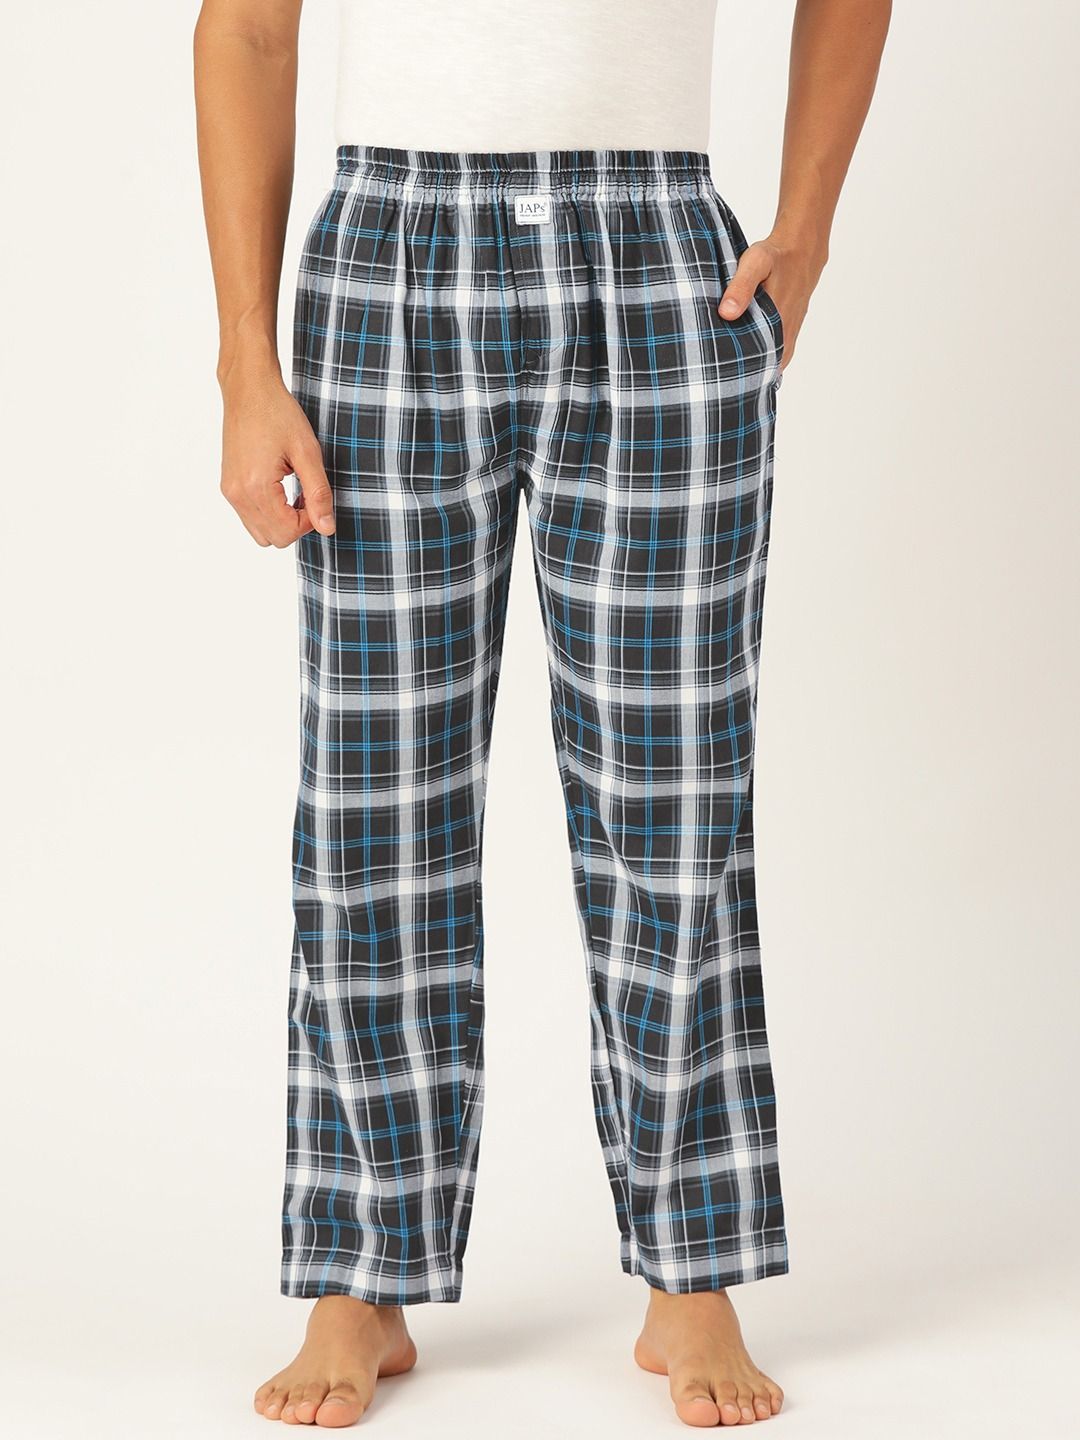 Lovely Casual Plaid Printed Black And White Pants | Mens pants fashion,  Mens plaid pants, Black pants men